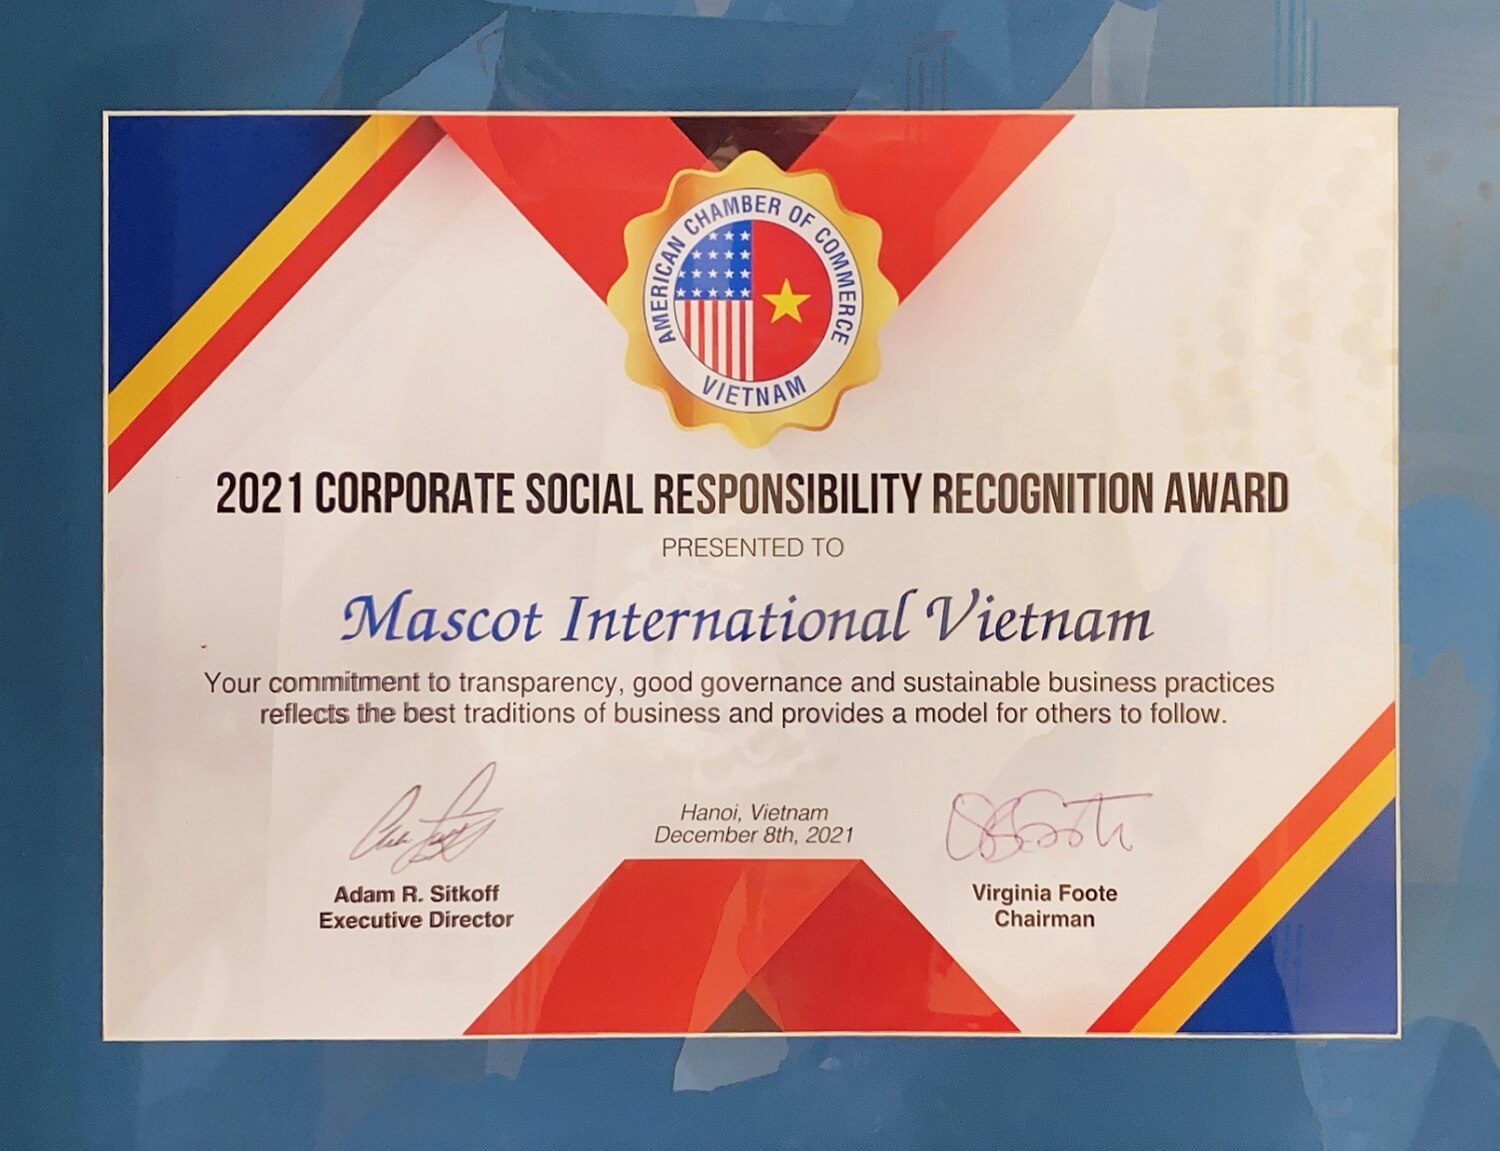 2021 Corporate Social Responsibility Recognition Award_MASCOT Vietnam_American Chamber of Commerce